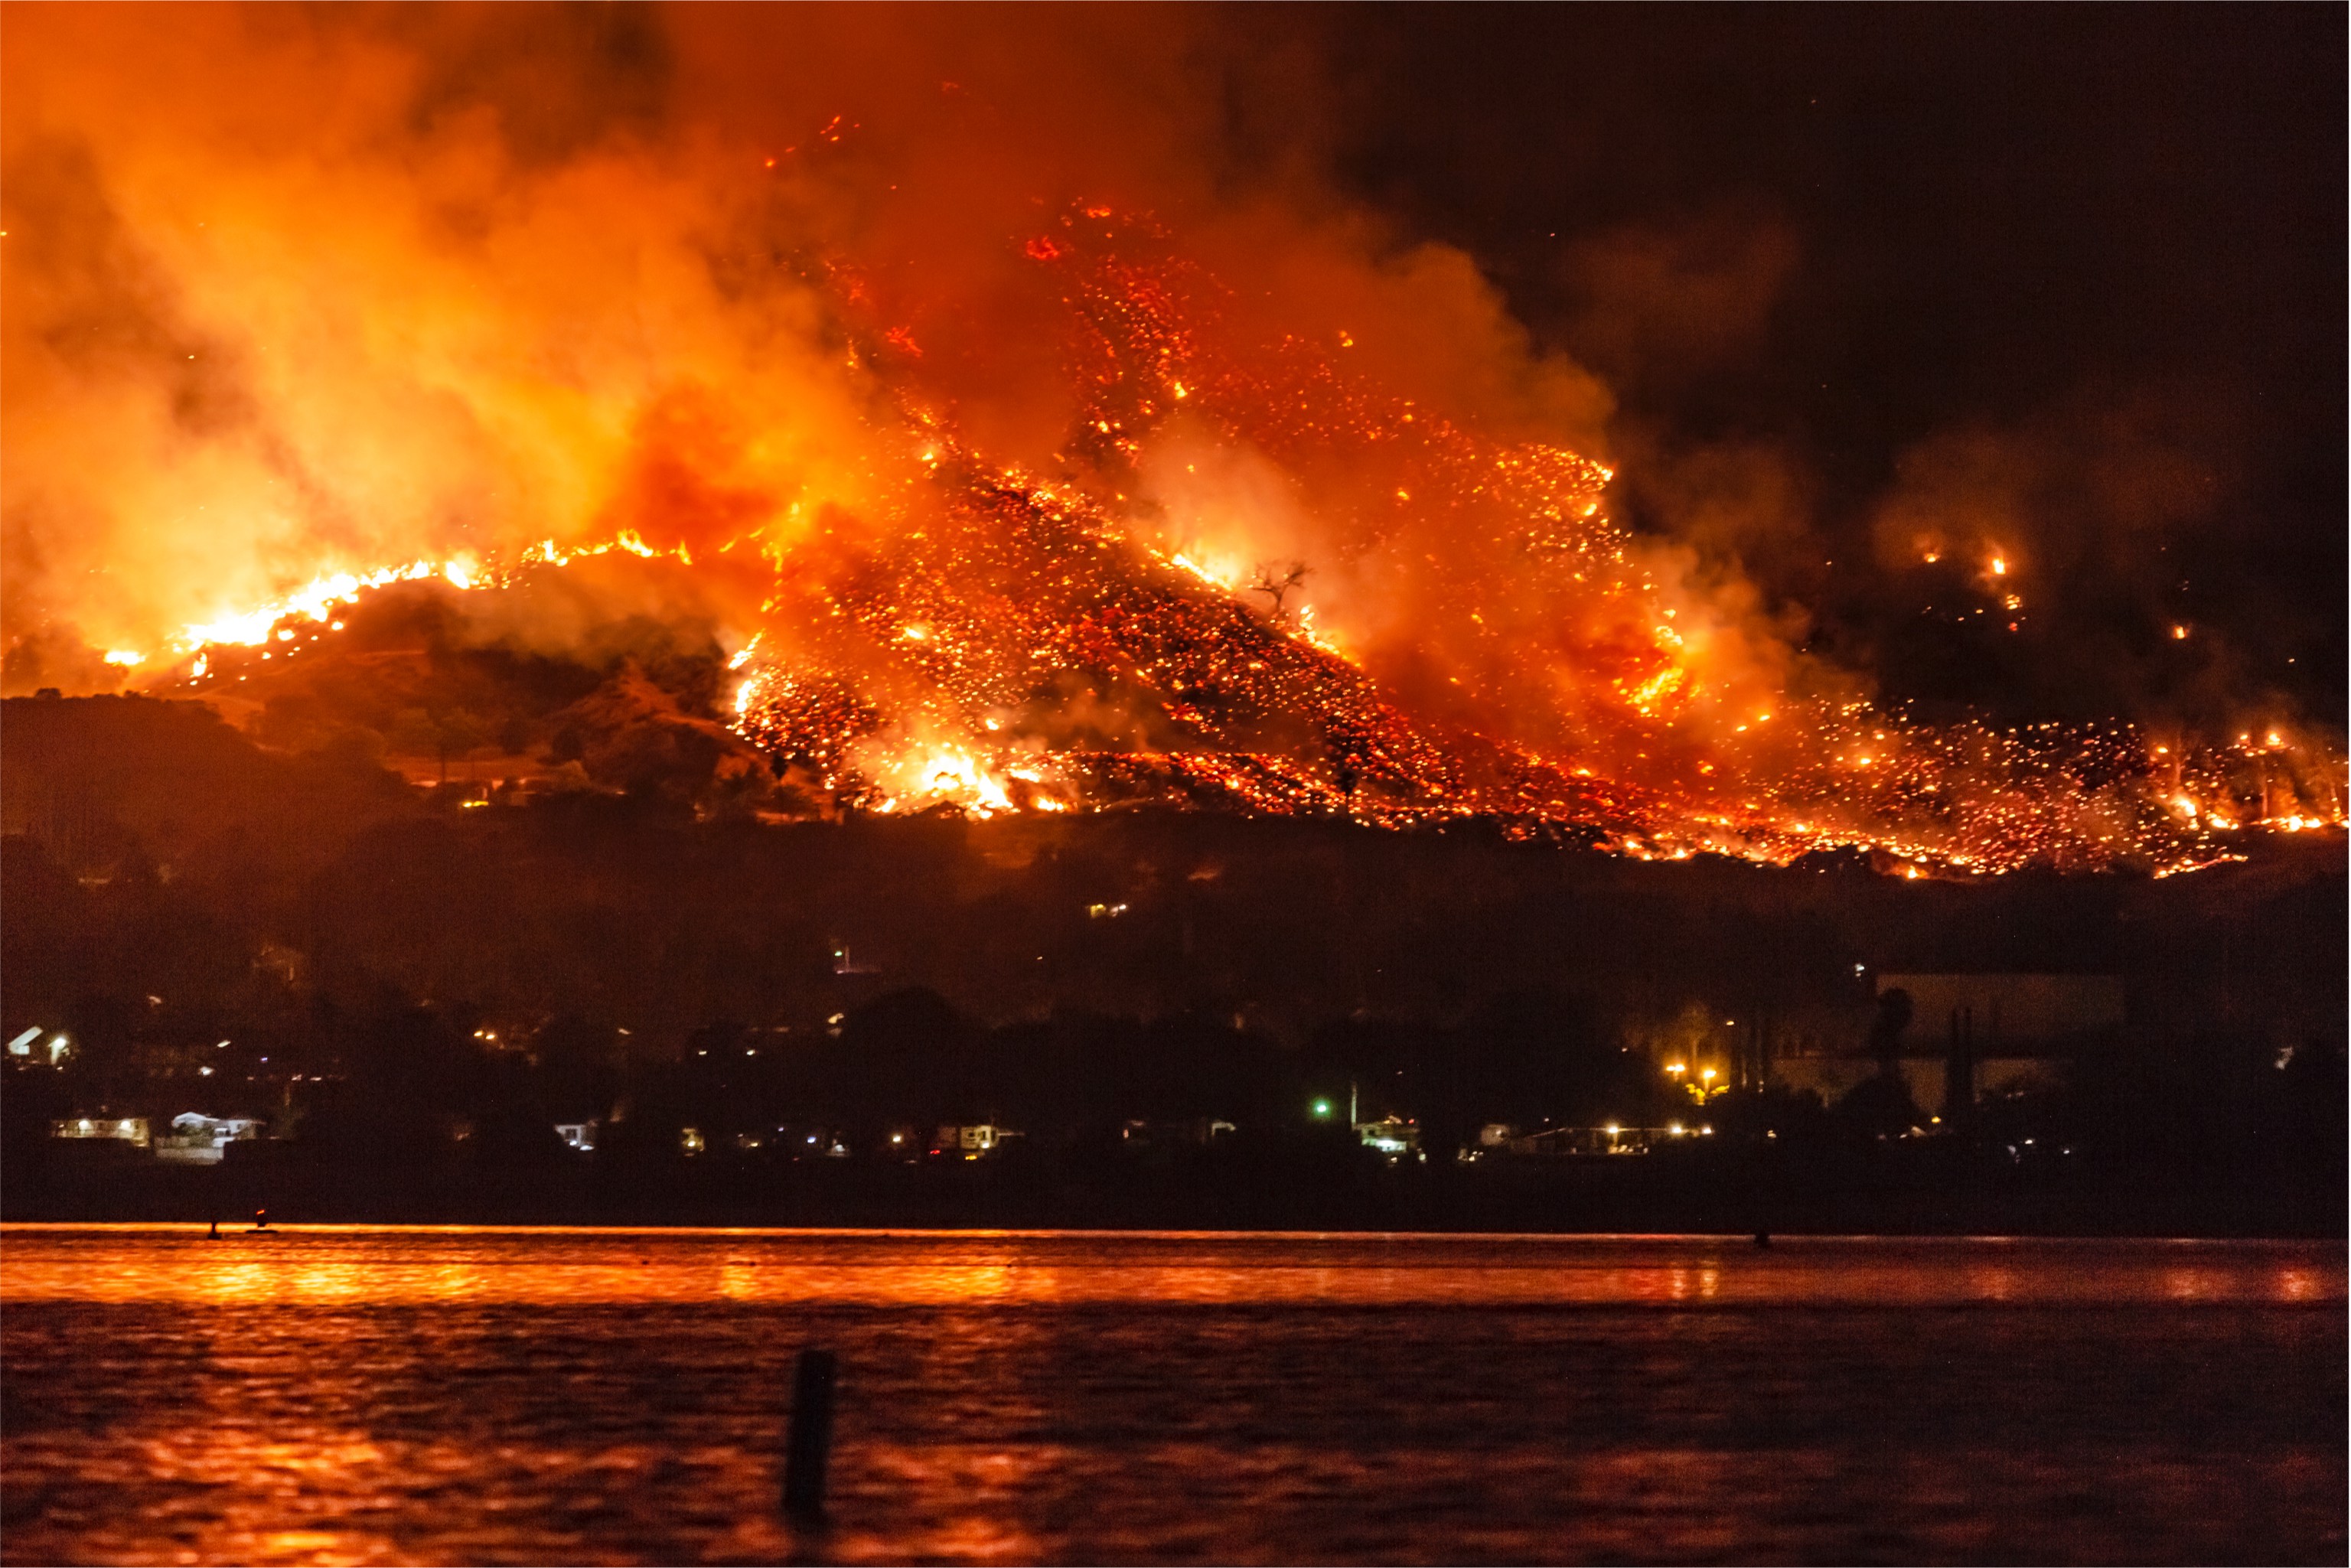 California Wildfires: The Holy Fire At Lake Elsinore On August 9, 2018.